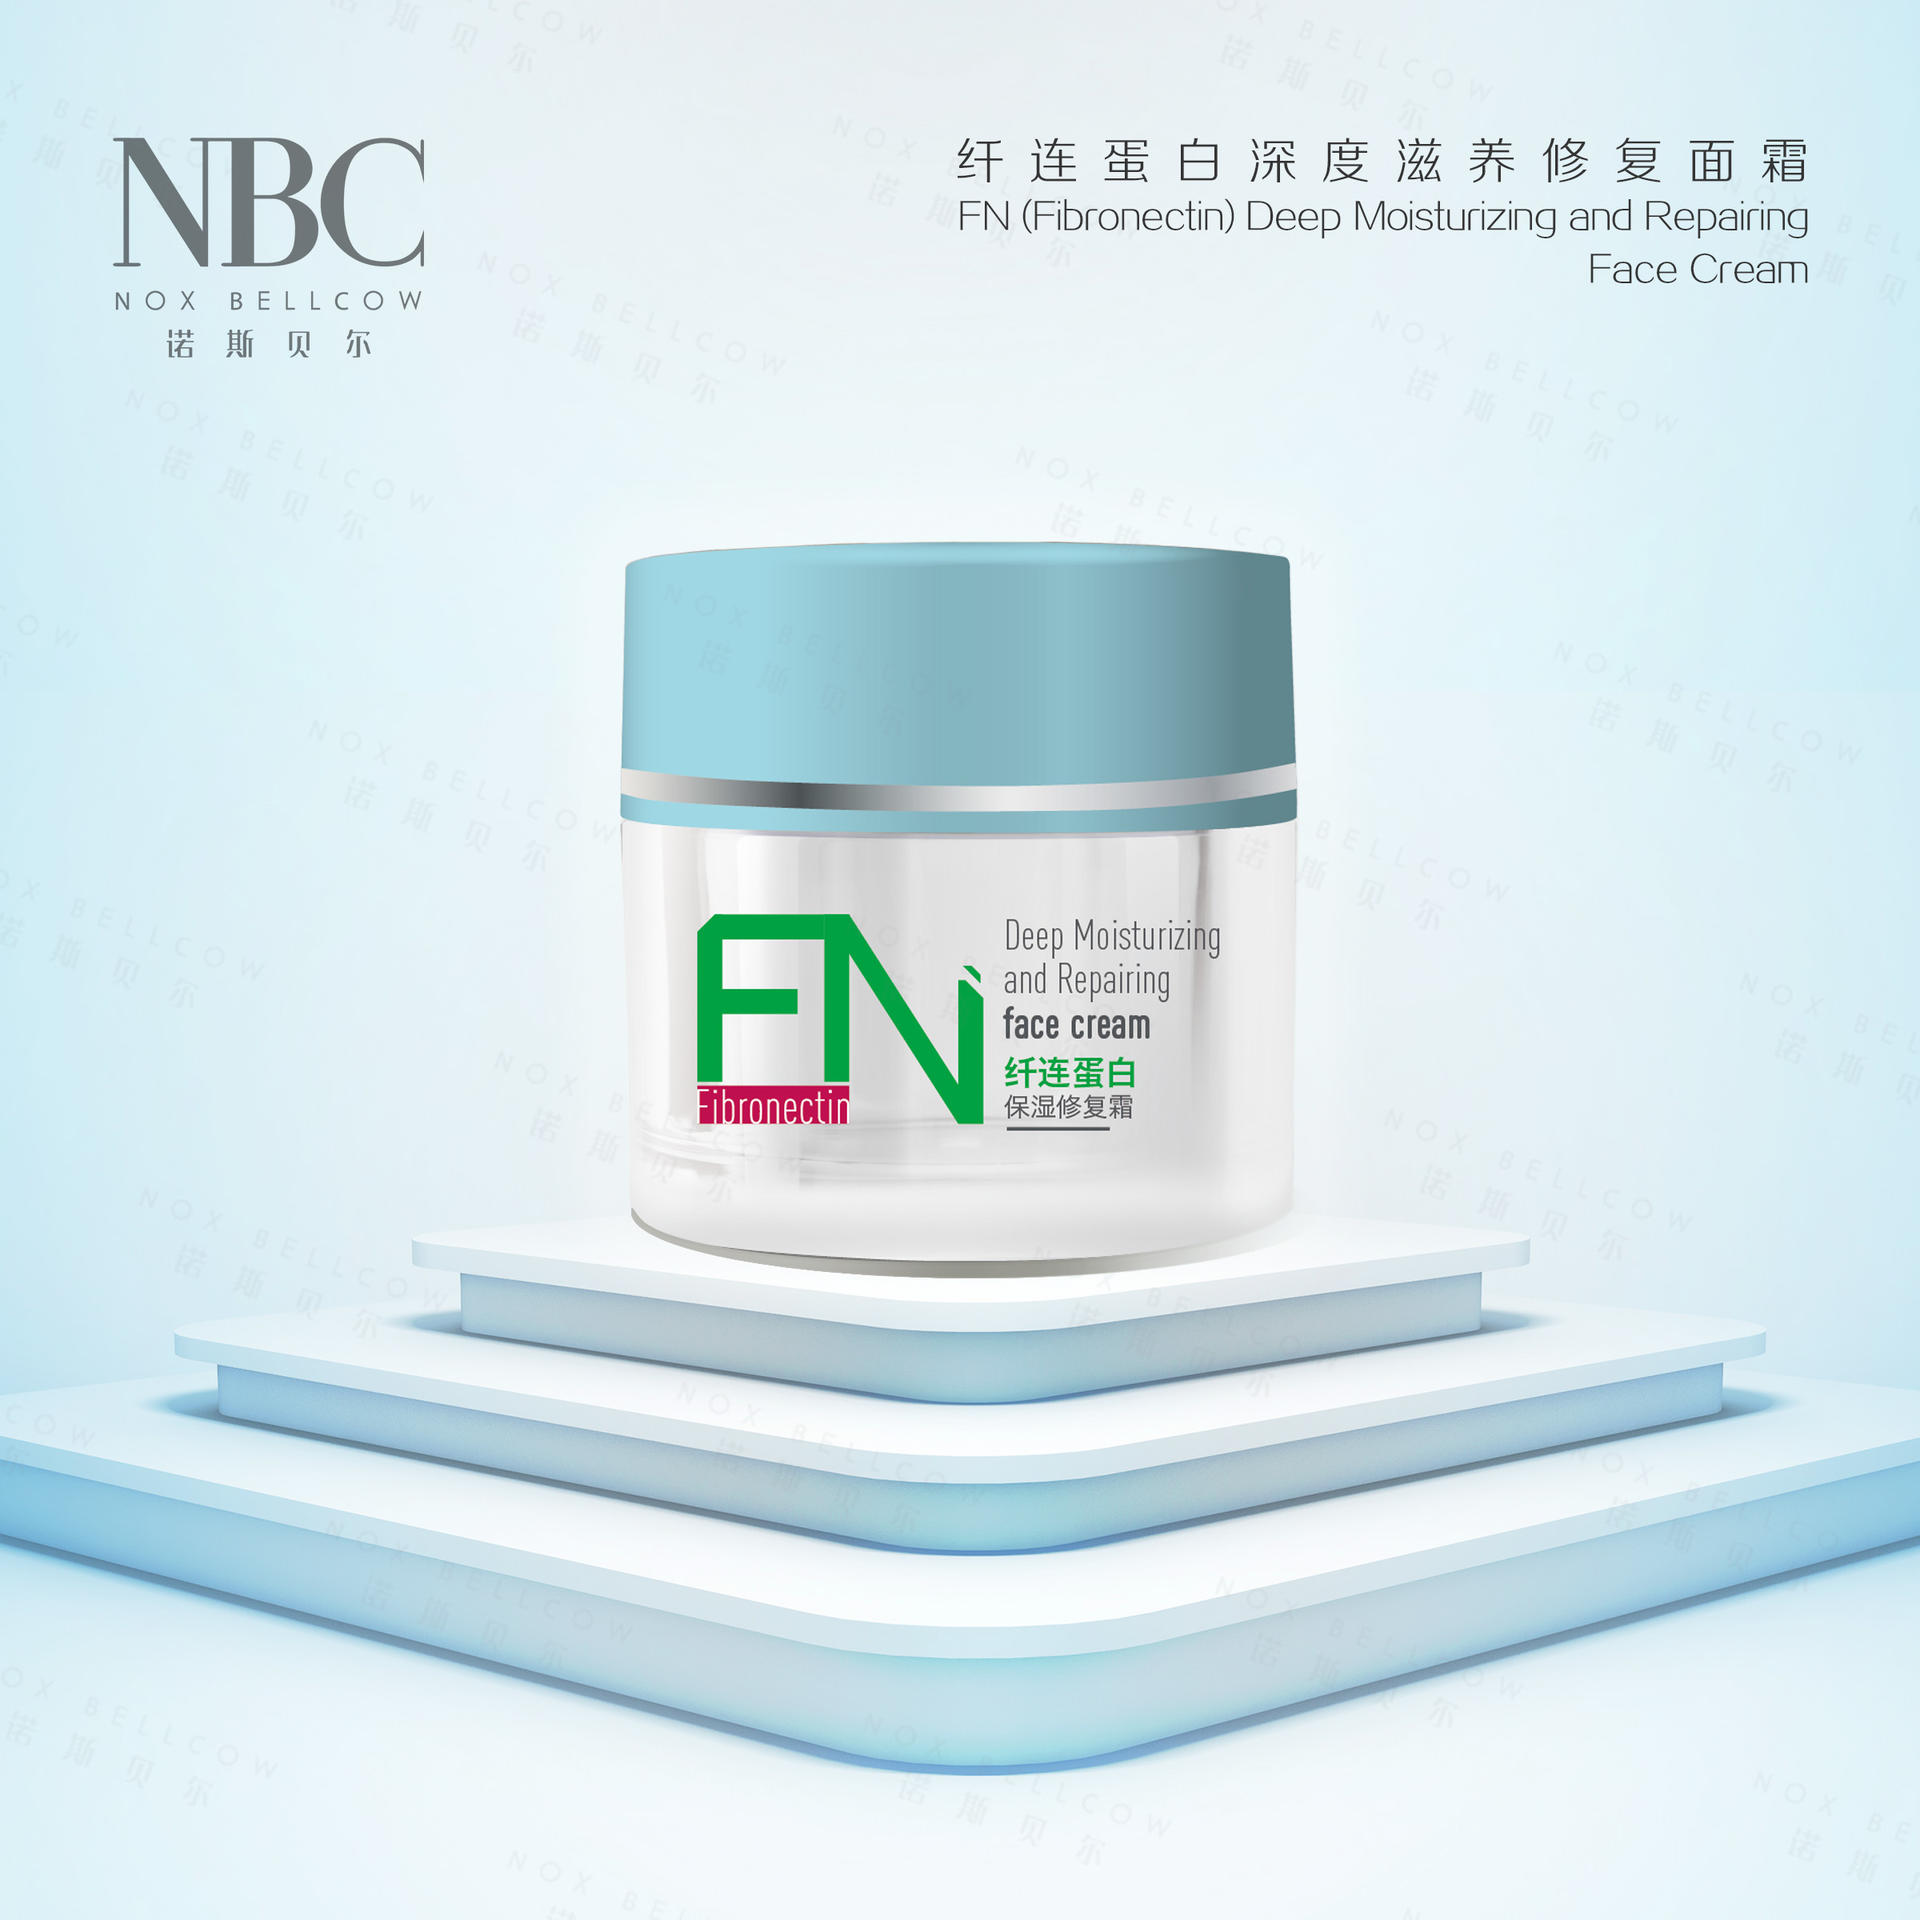 NOX BELLCOW good skin care products manufacturer